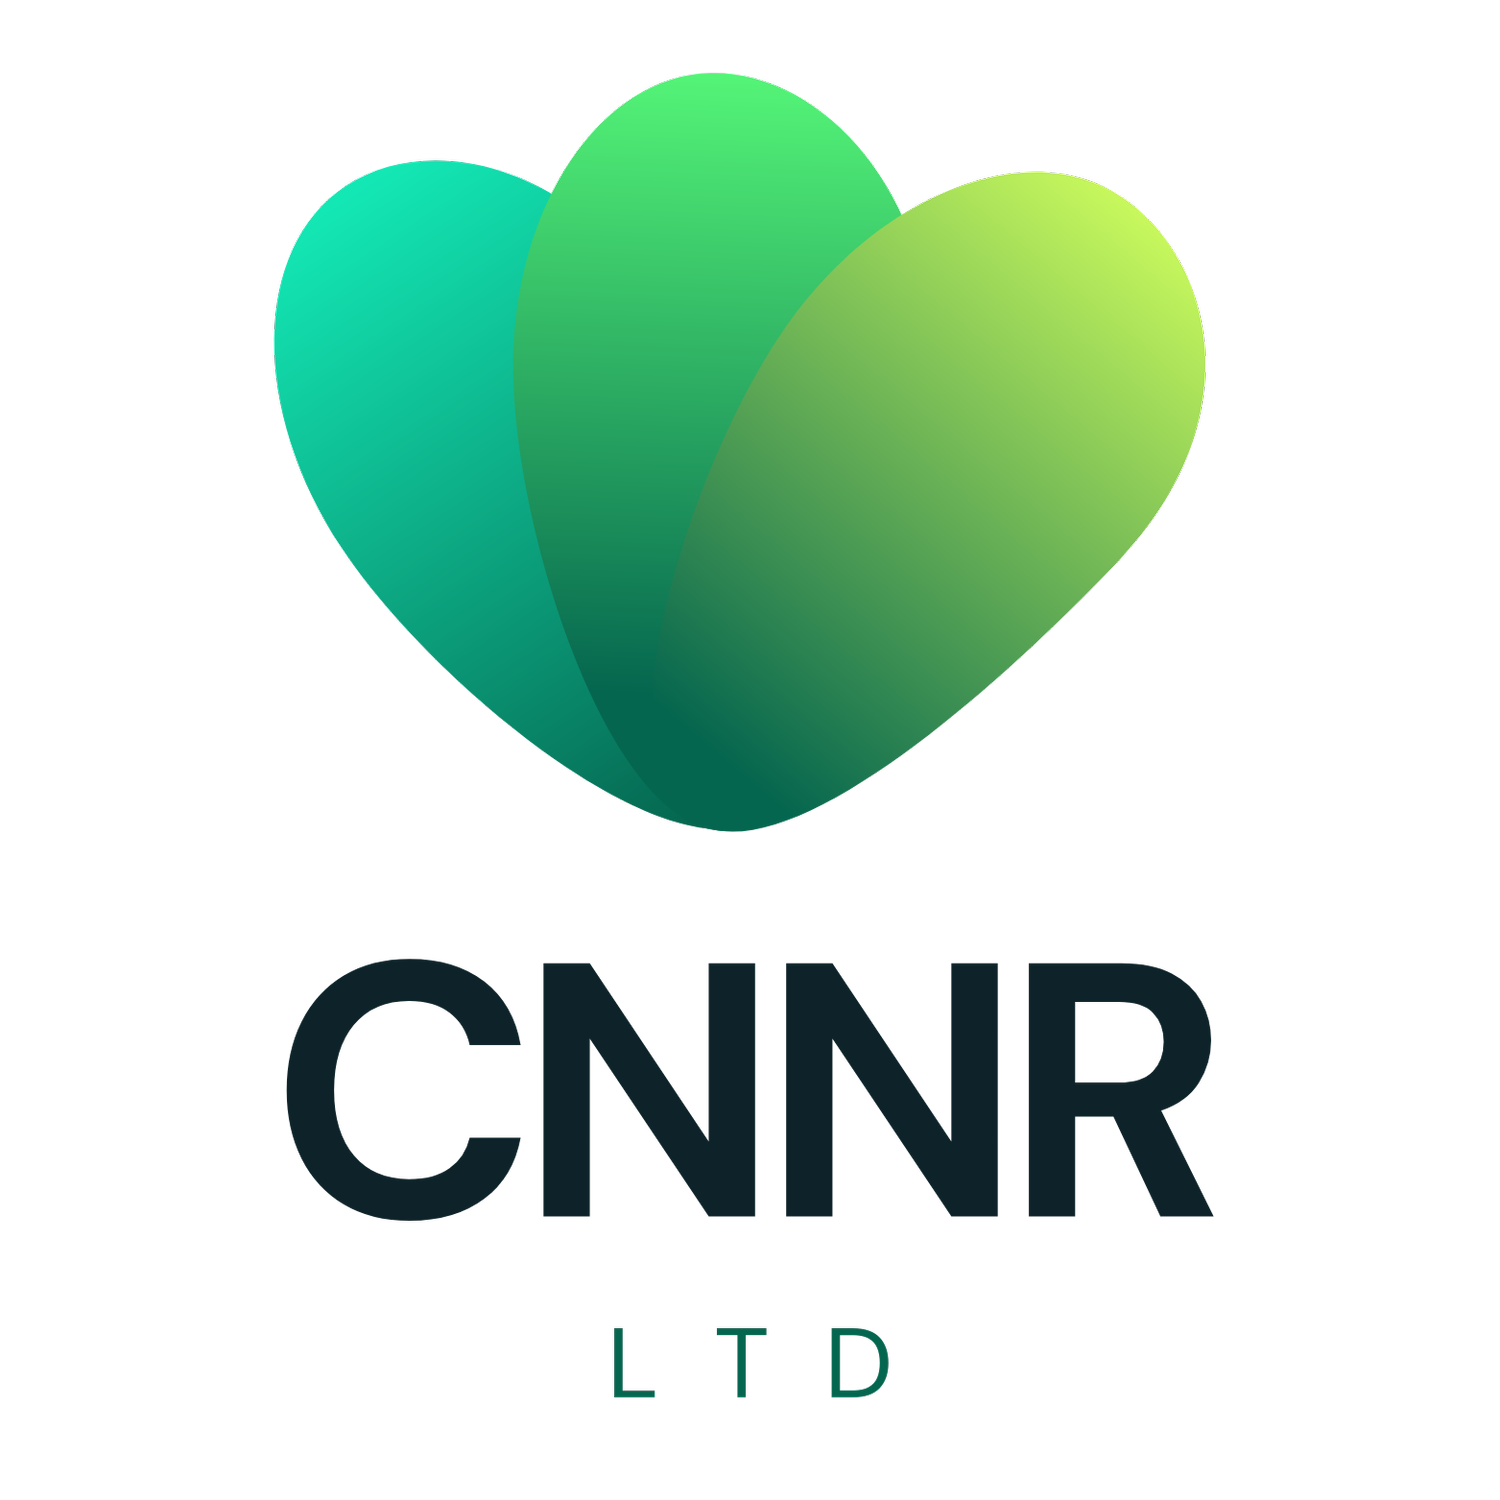 CNNR LTD: Pioneering Creative Solutions and Transformative Business Coaching